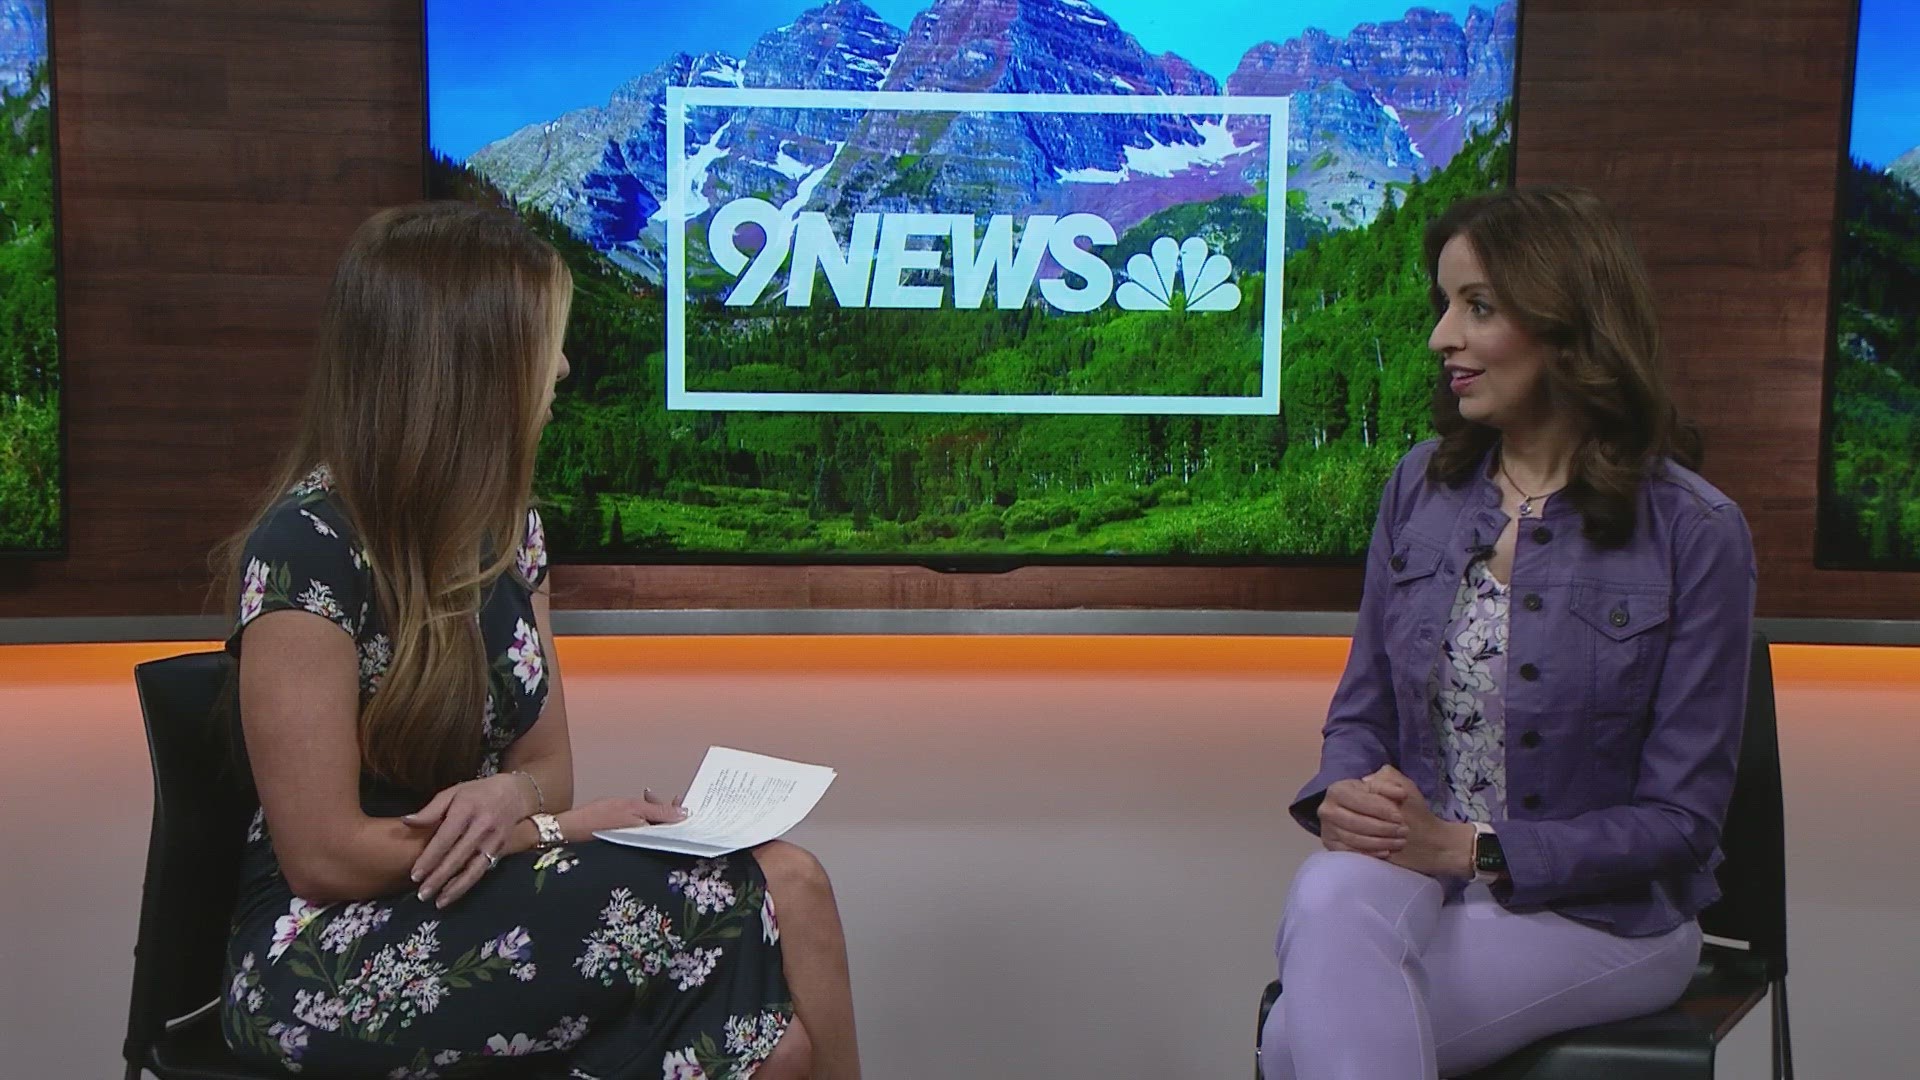 9NEWS Health Expert Dr. Payal Kohli discusses new research looking into how eye exams can help detect Alzheimer's disease before symptoms begin.